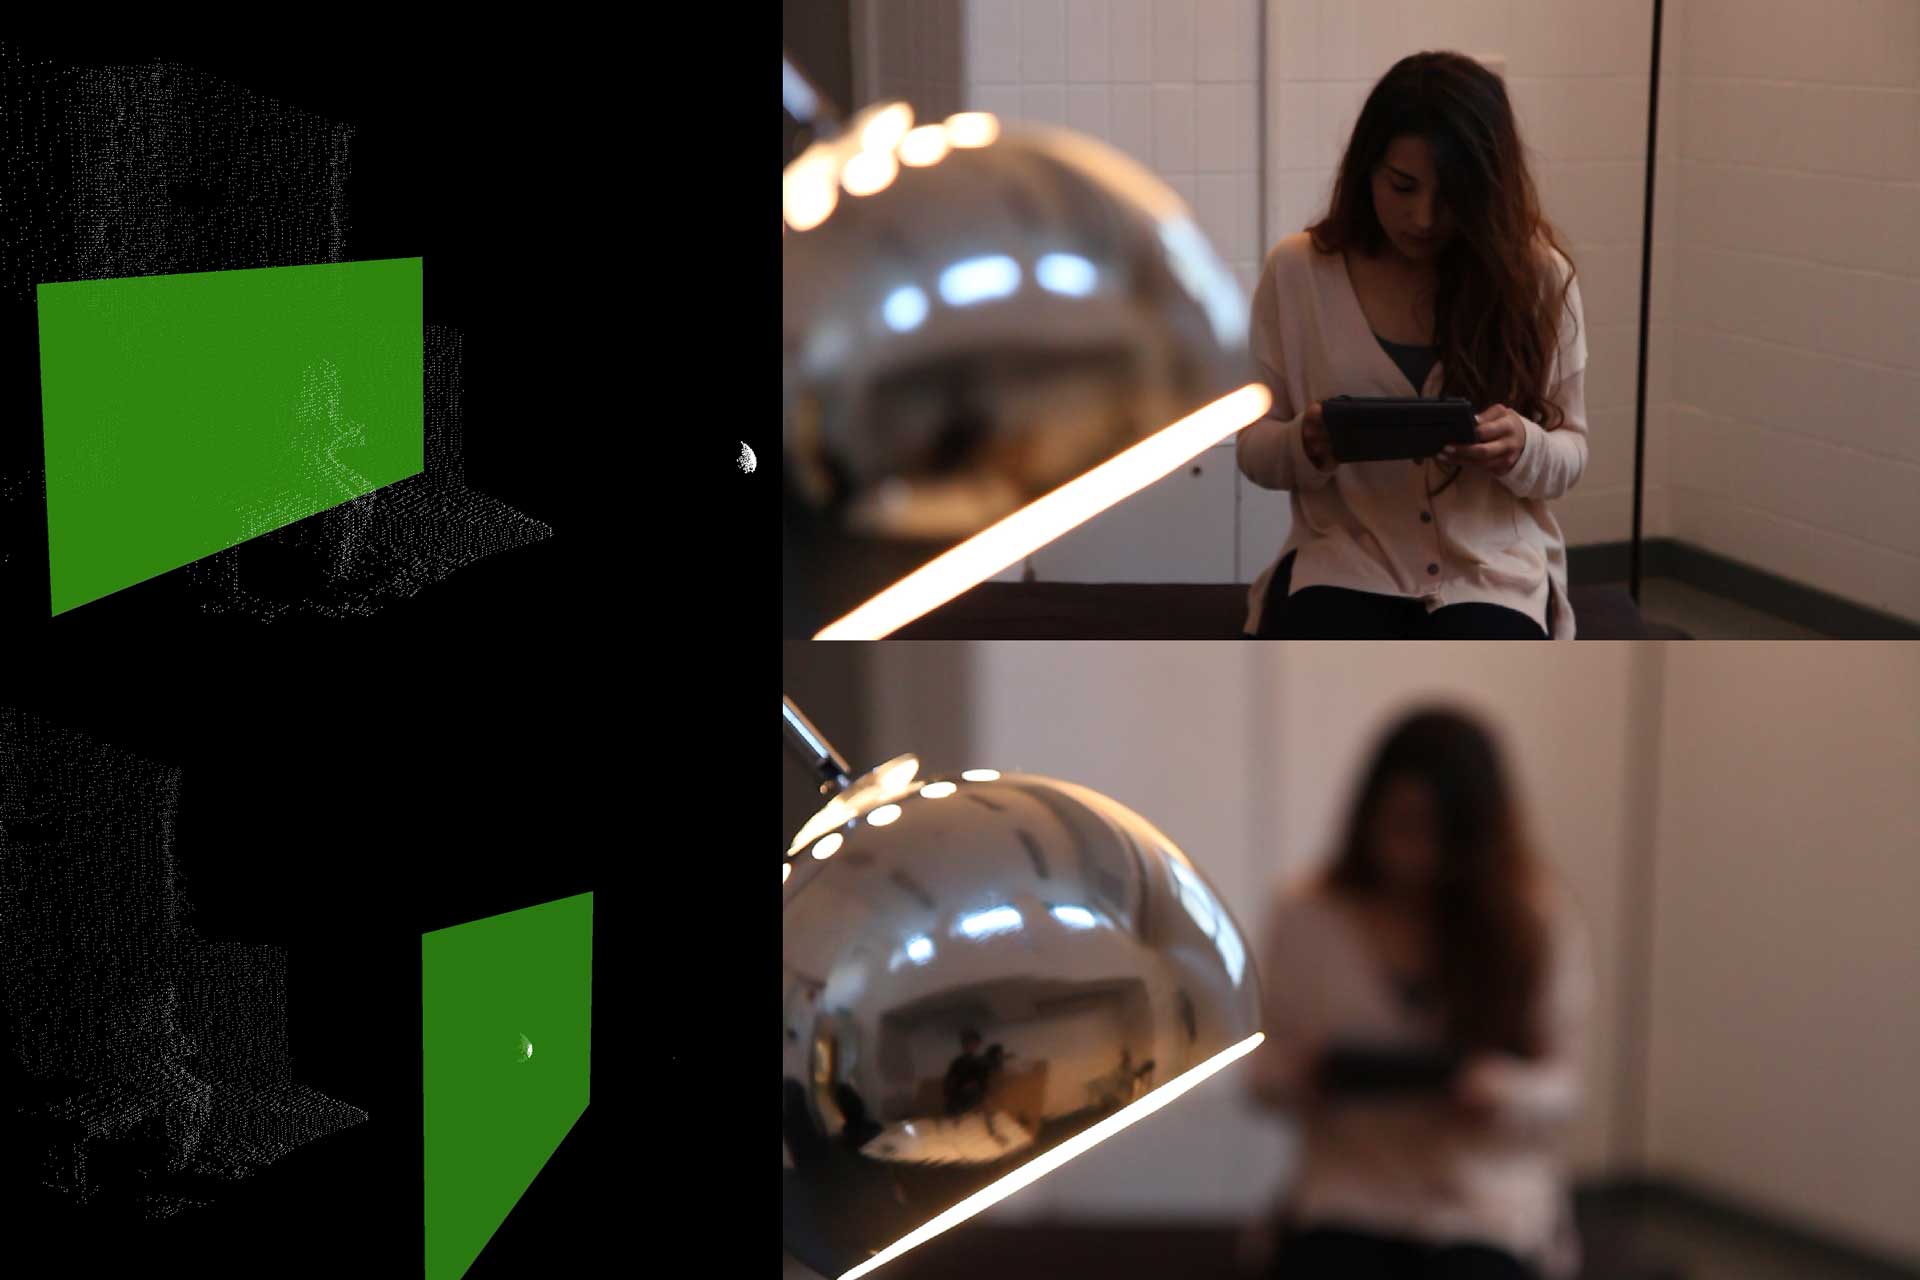 Side by side views of a focusing interface using a depth camera and the resulting shots